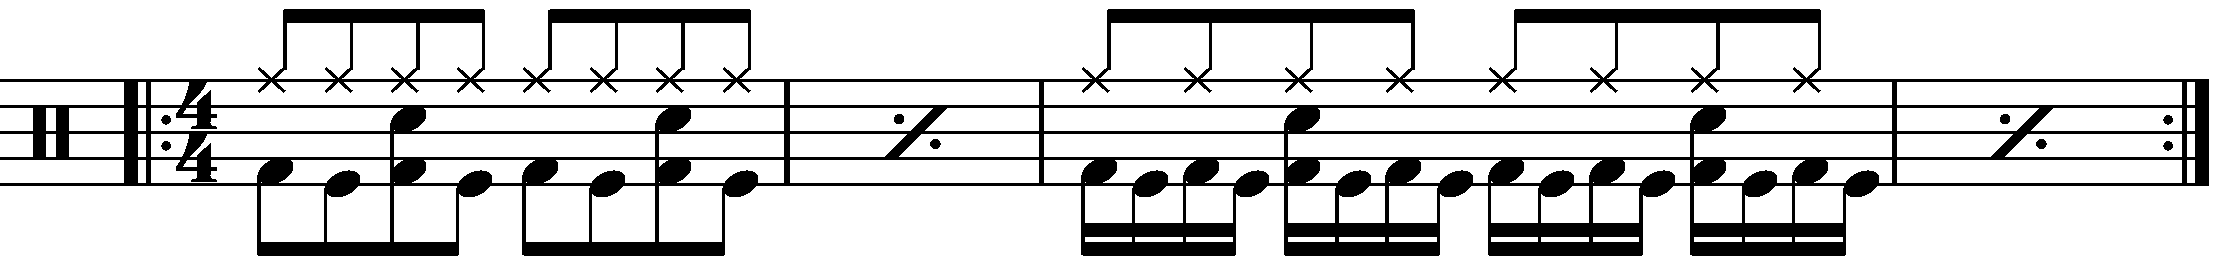 8th Note to 16th Note Double kick groove exercise.